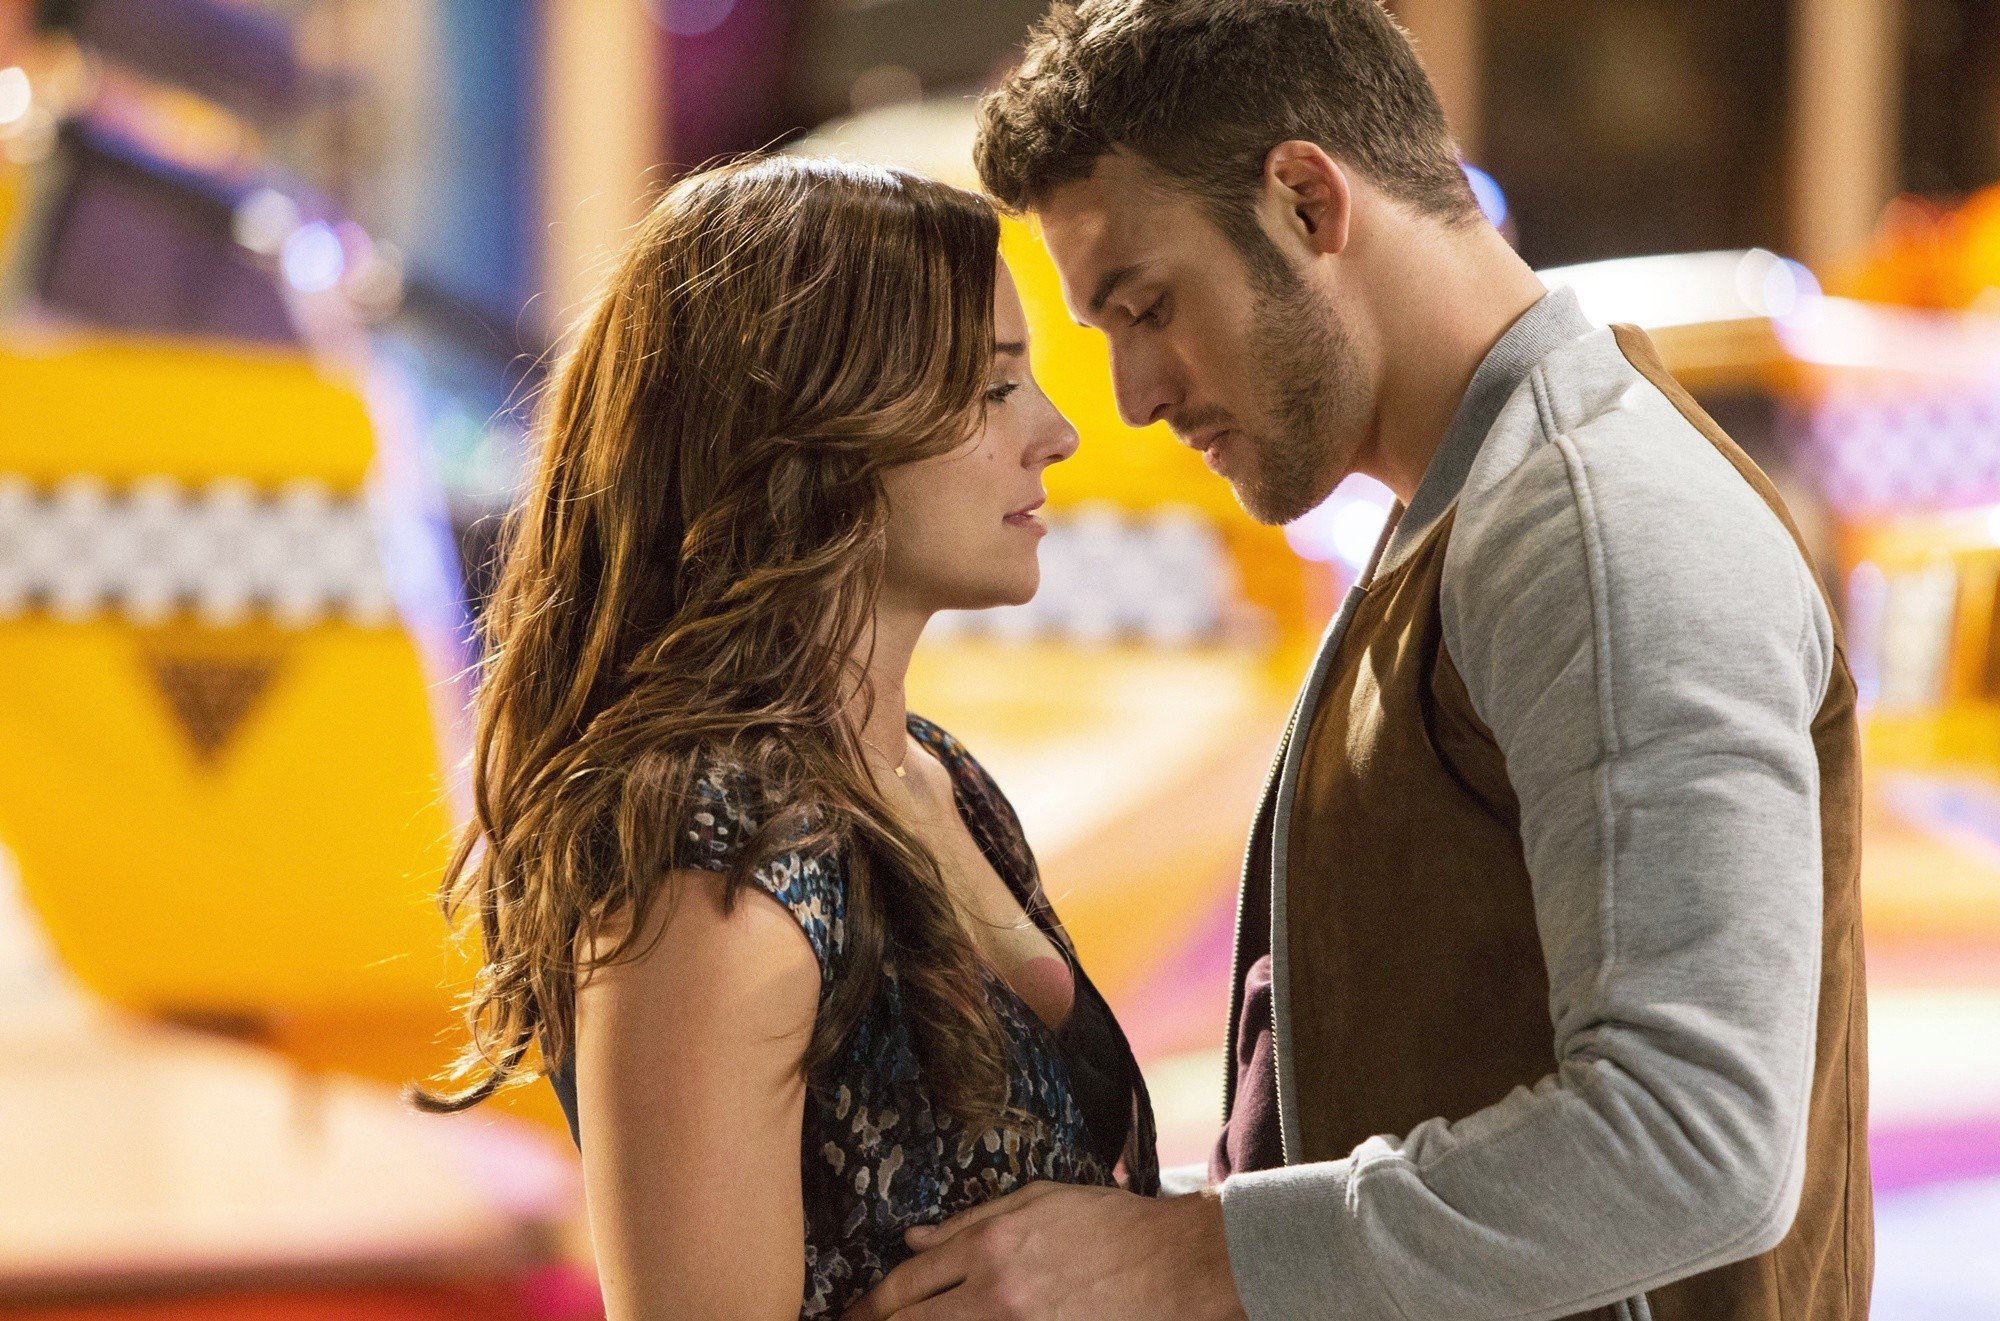 Briana Evigan stars as Andie and Ryan Guzman stars as Sean in Summit Entertainment's Step Up All In (2014). Photo credit by James Dittger.